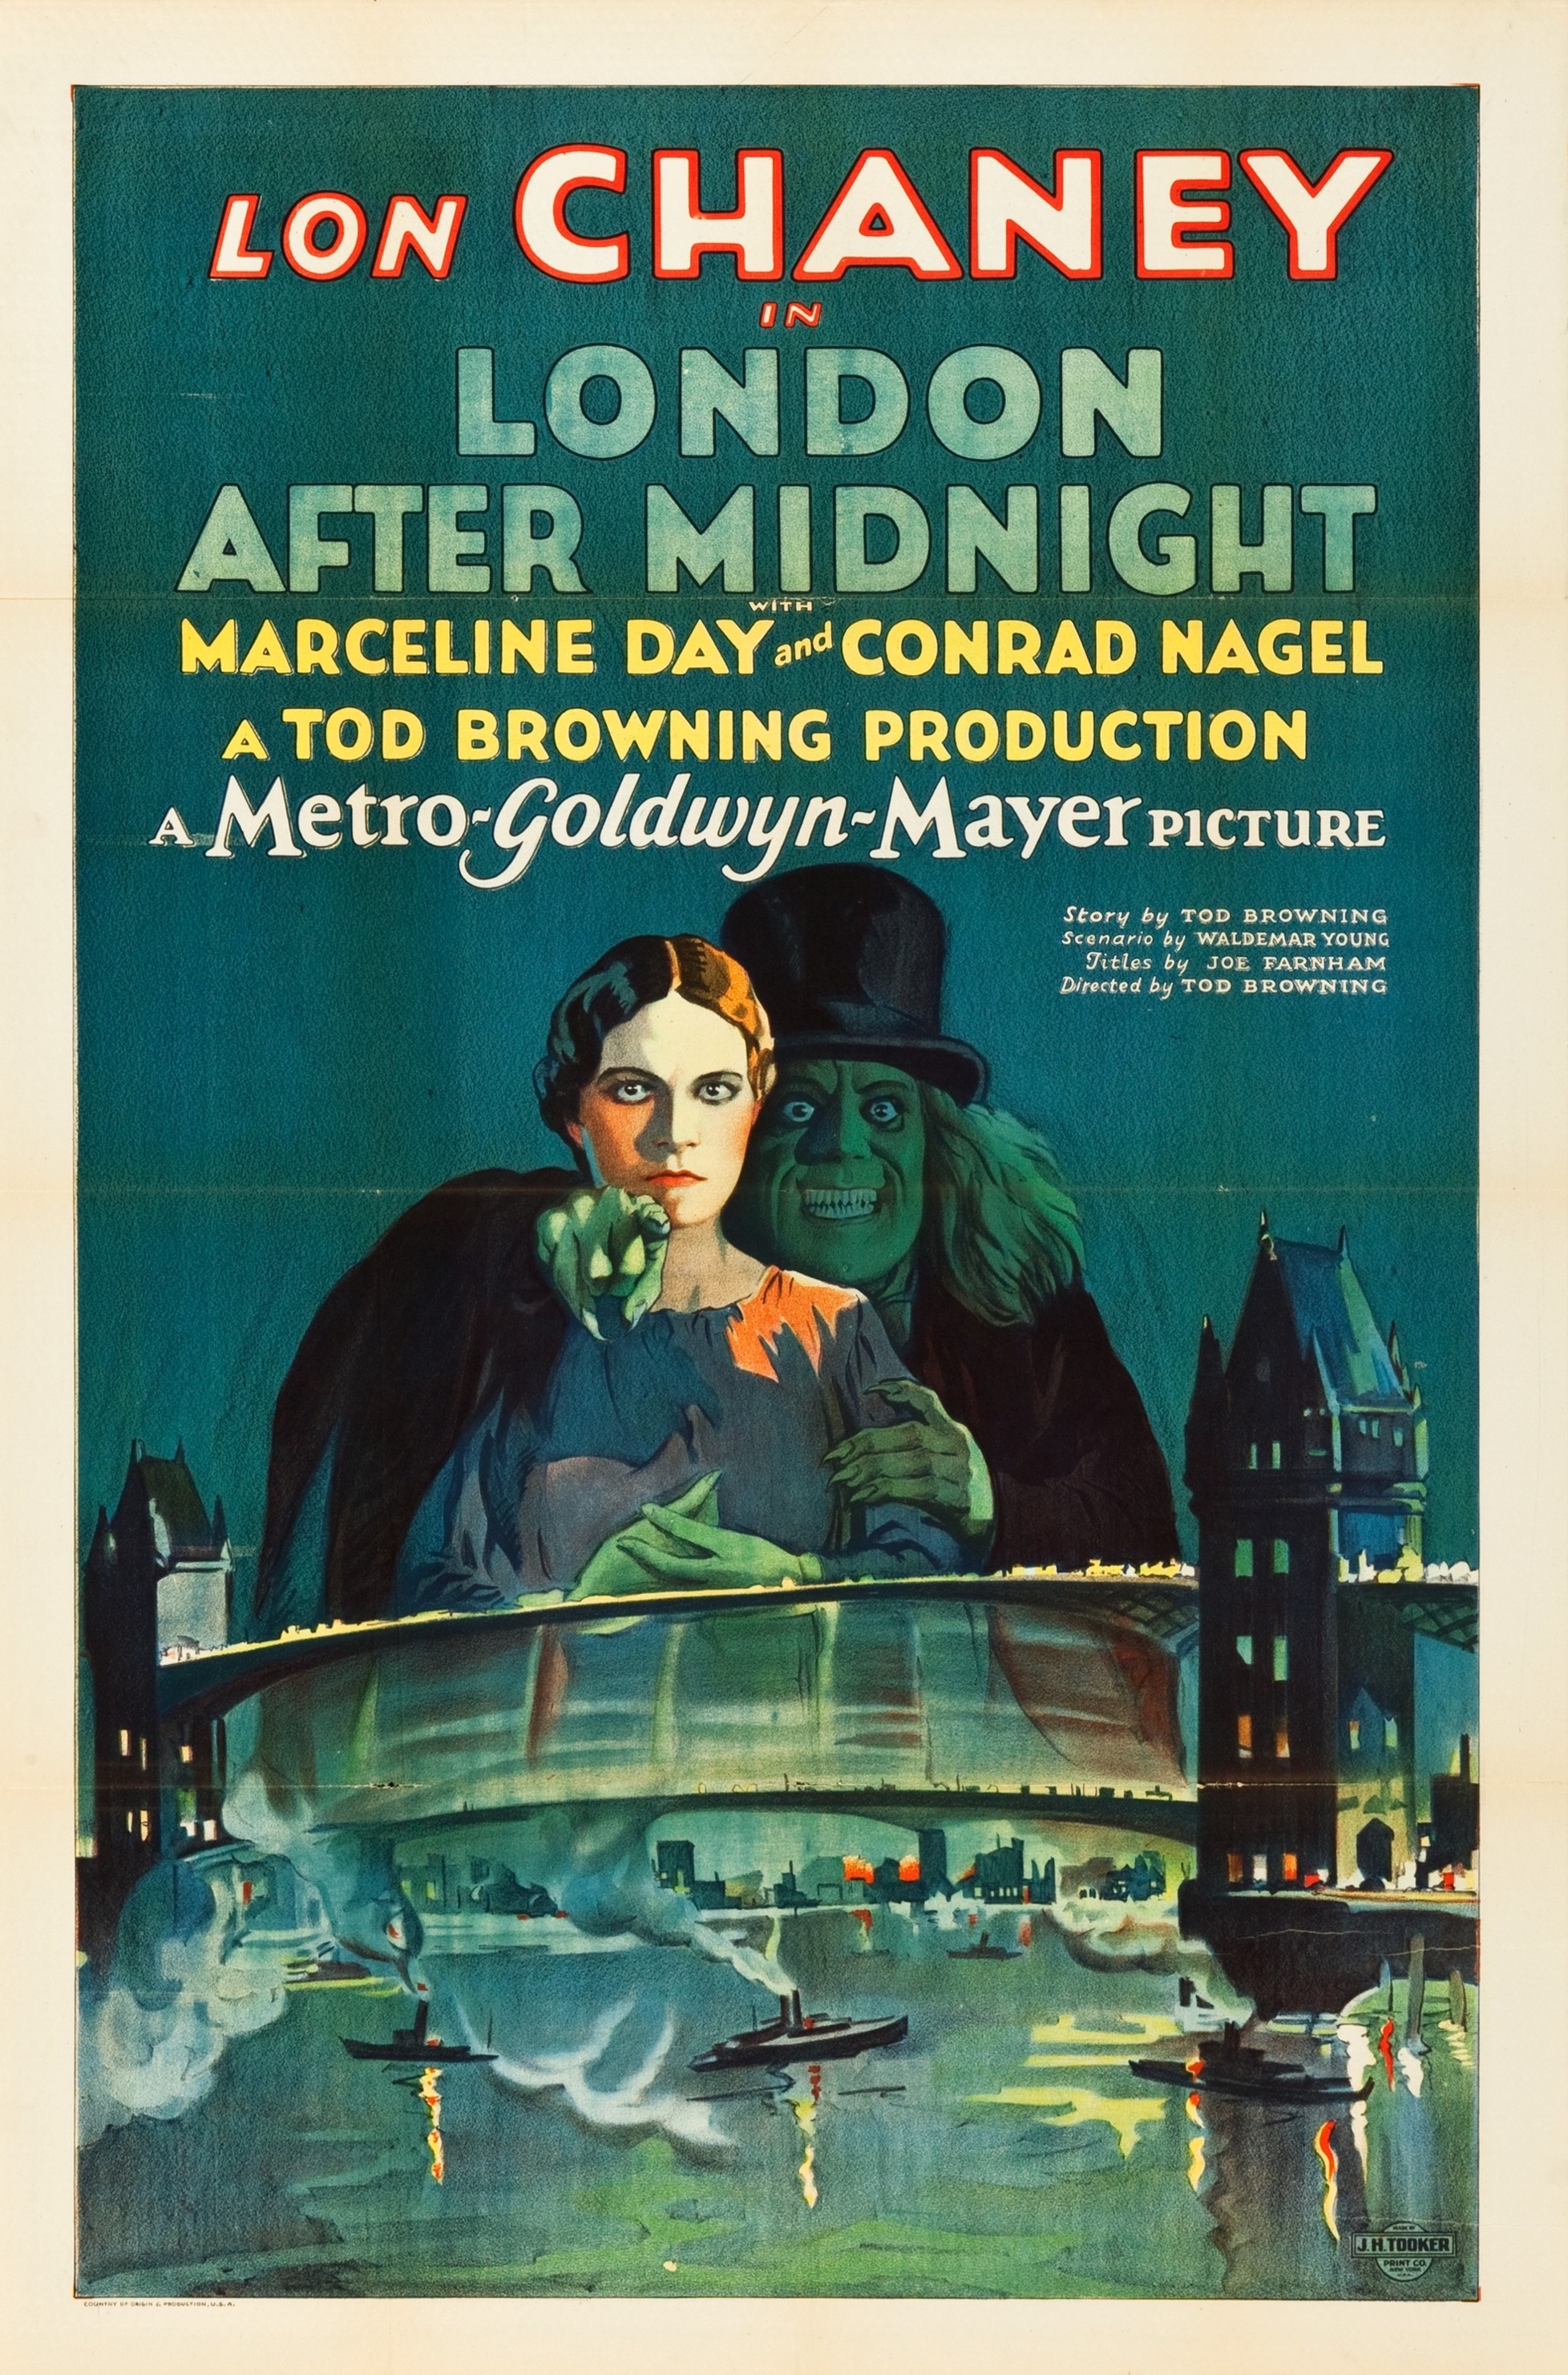 London After Midnight Theatrical Poster.jpg